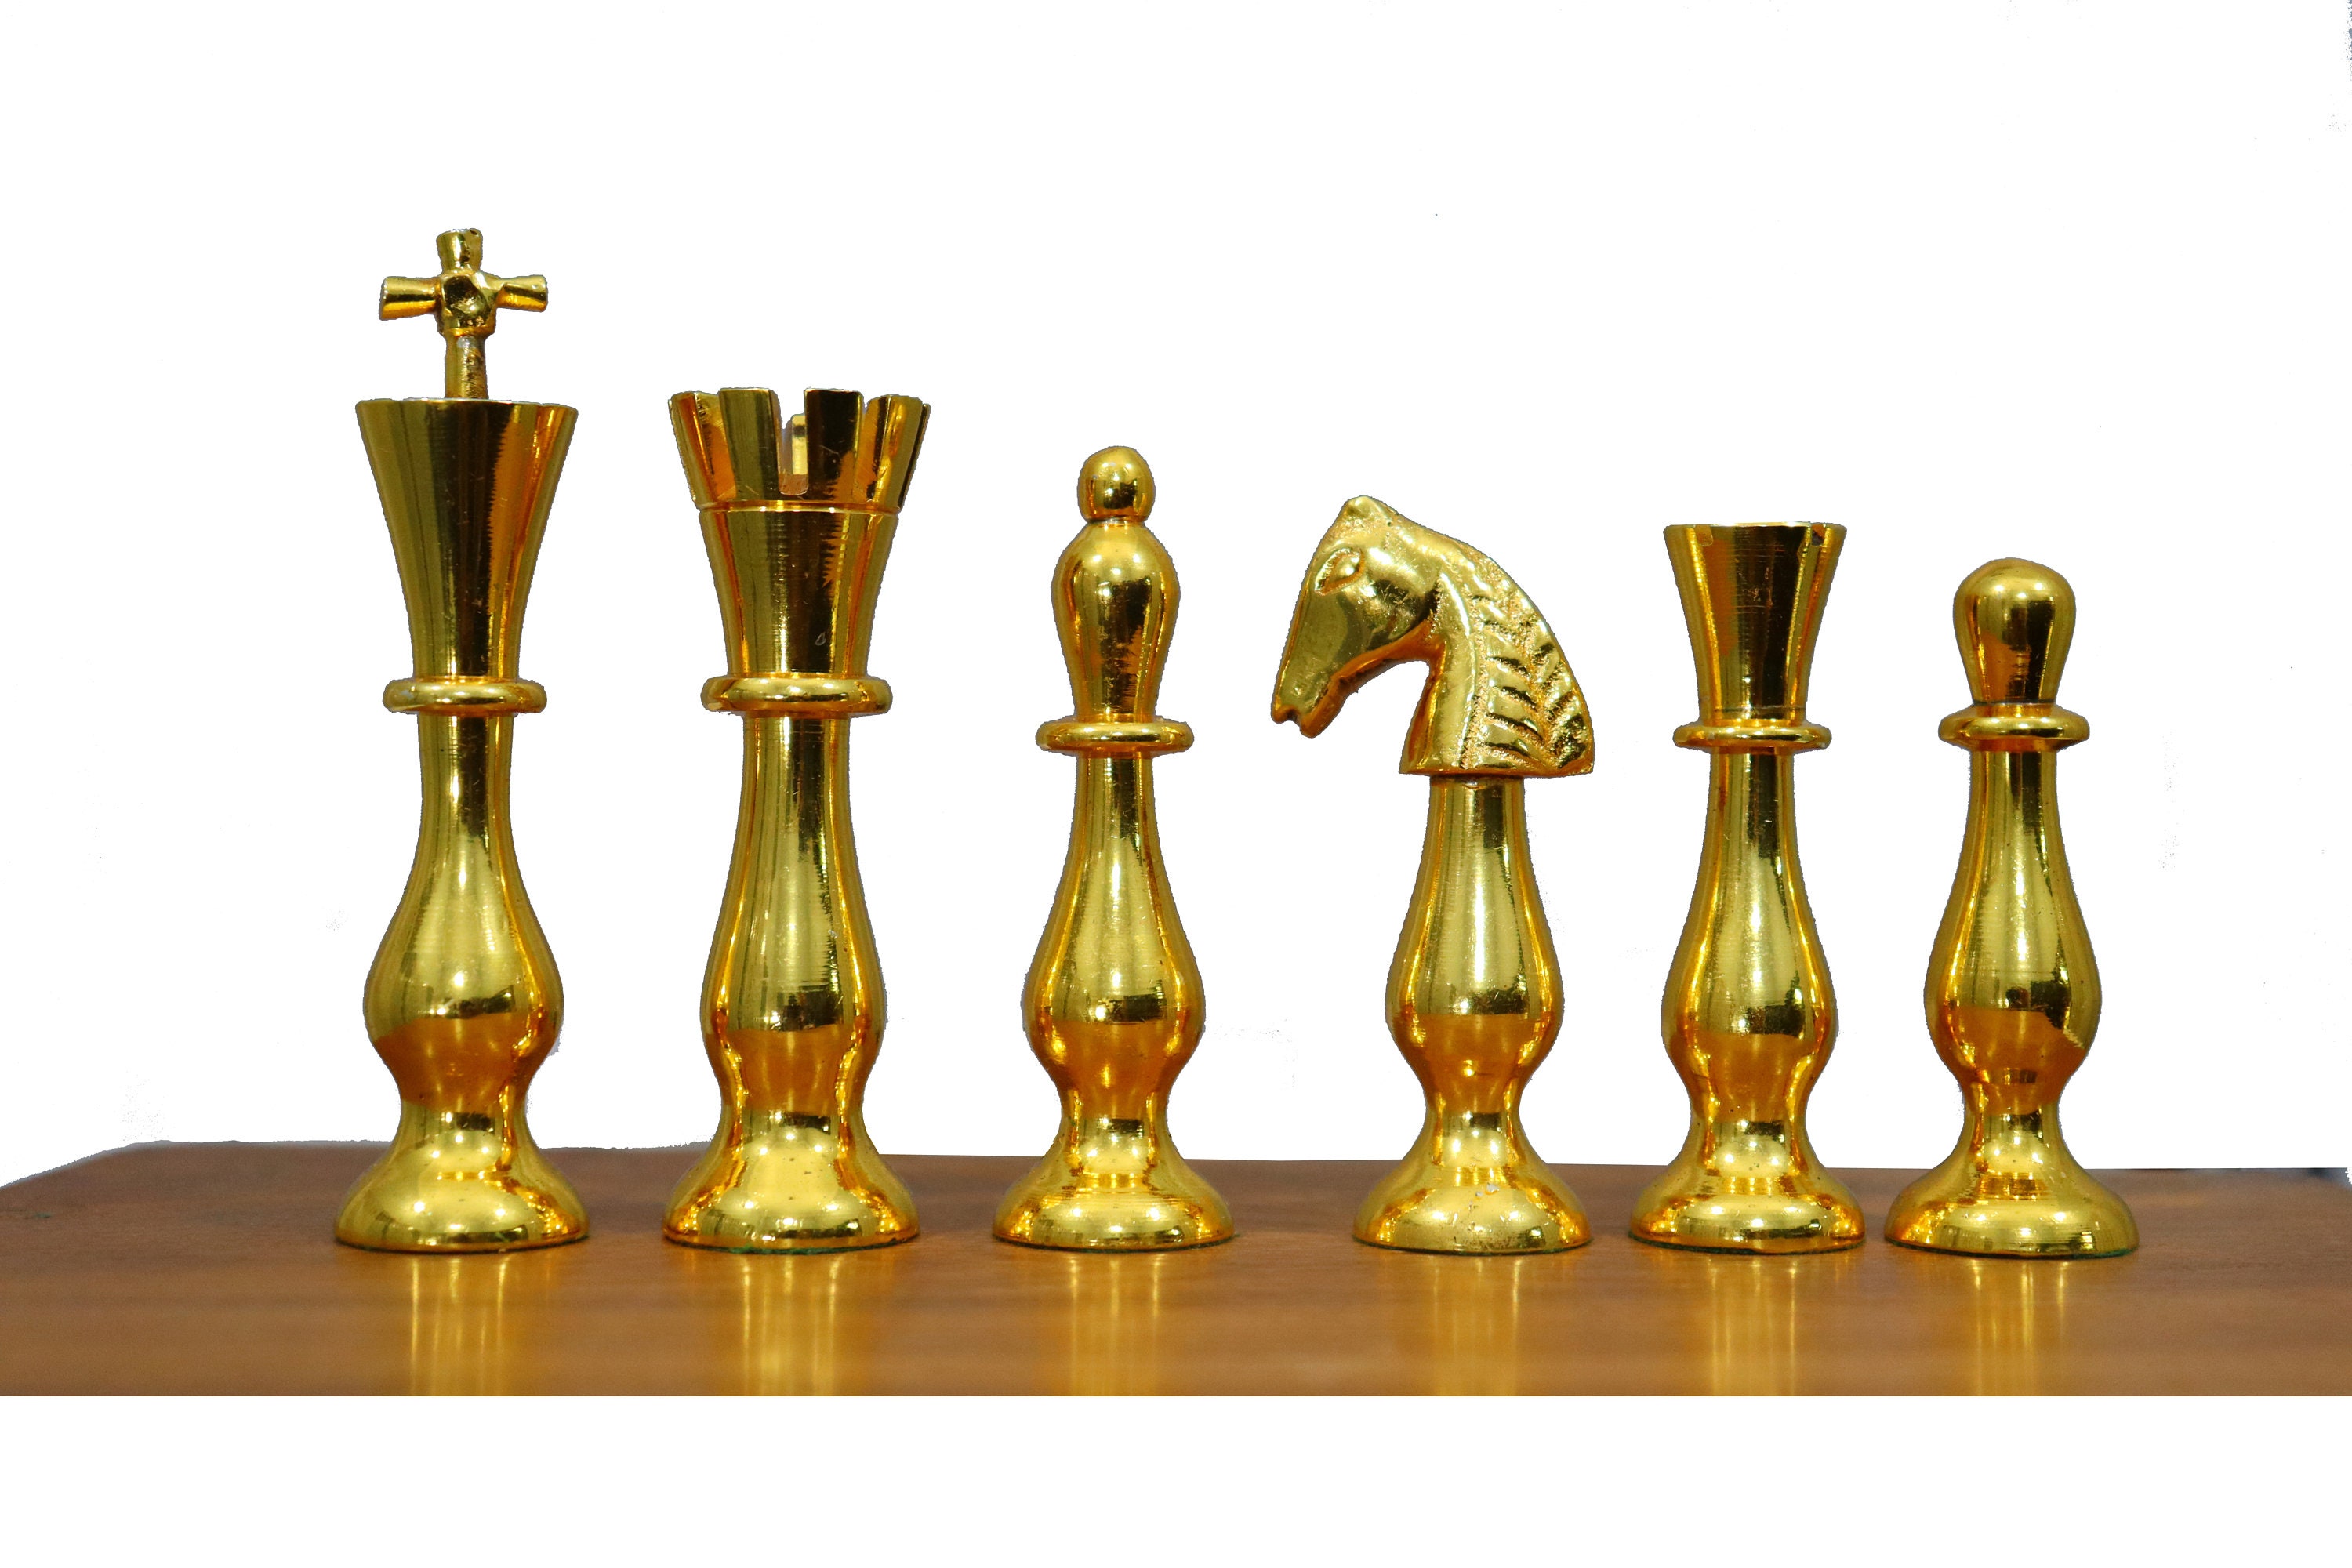 Artistic Handcrafted Metal Chess Pieces & Board Set With - Etsy